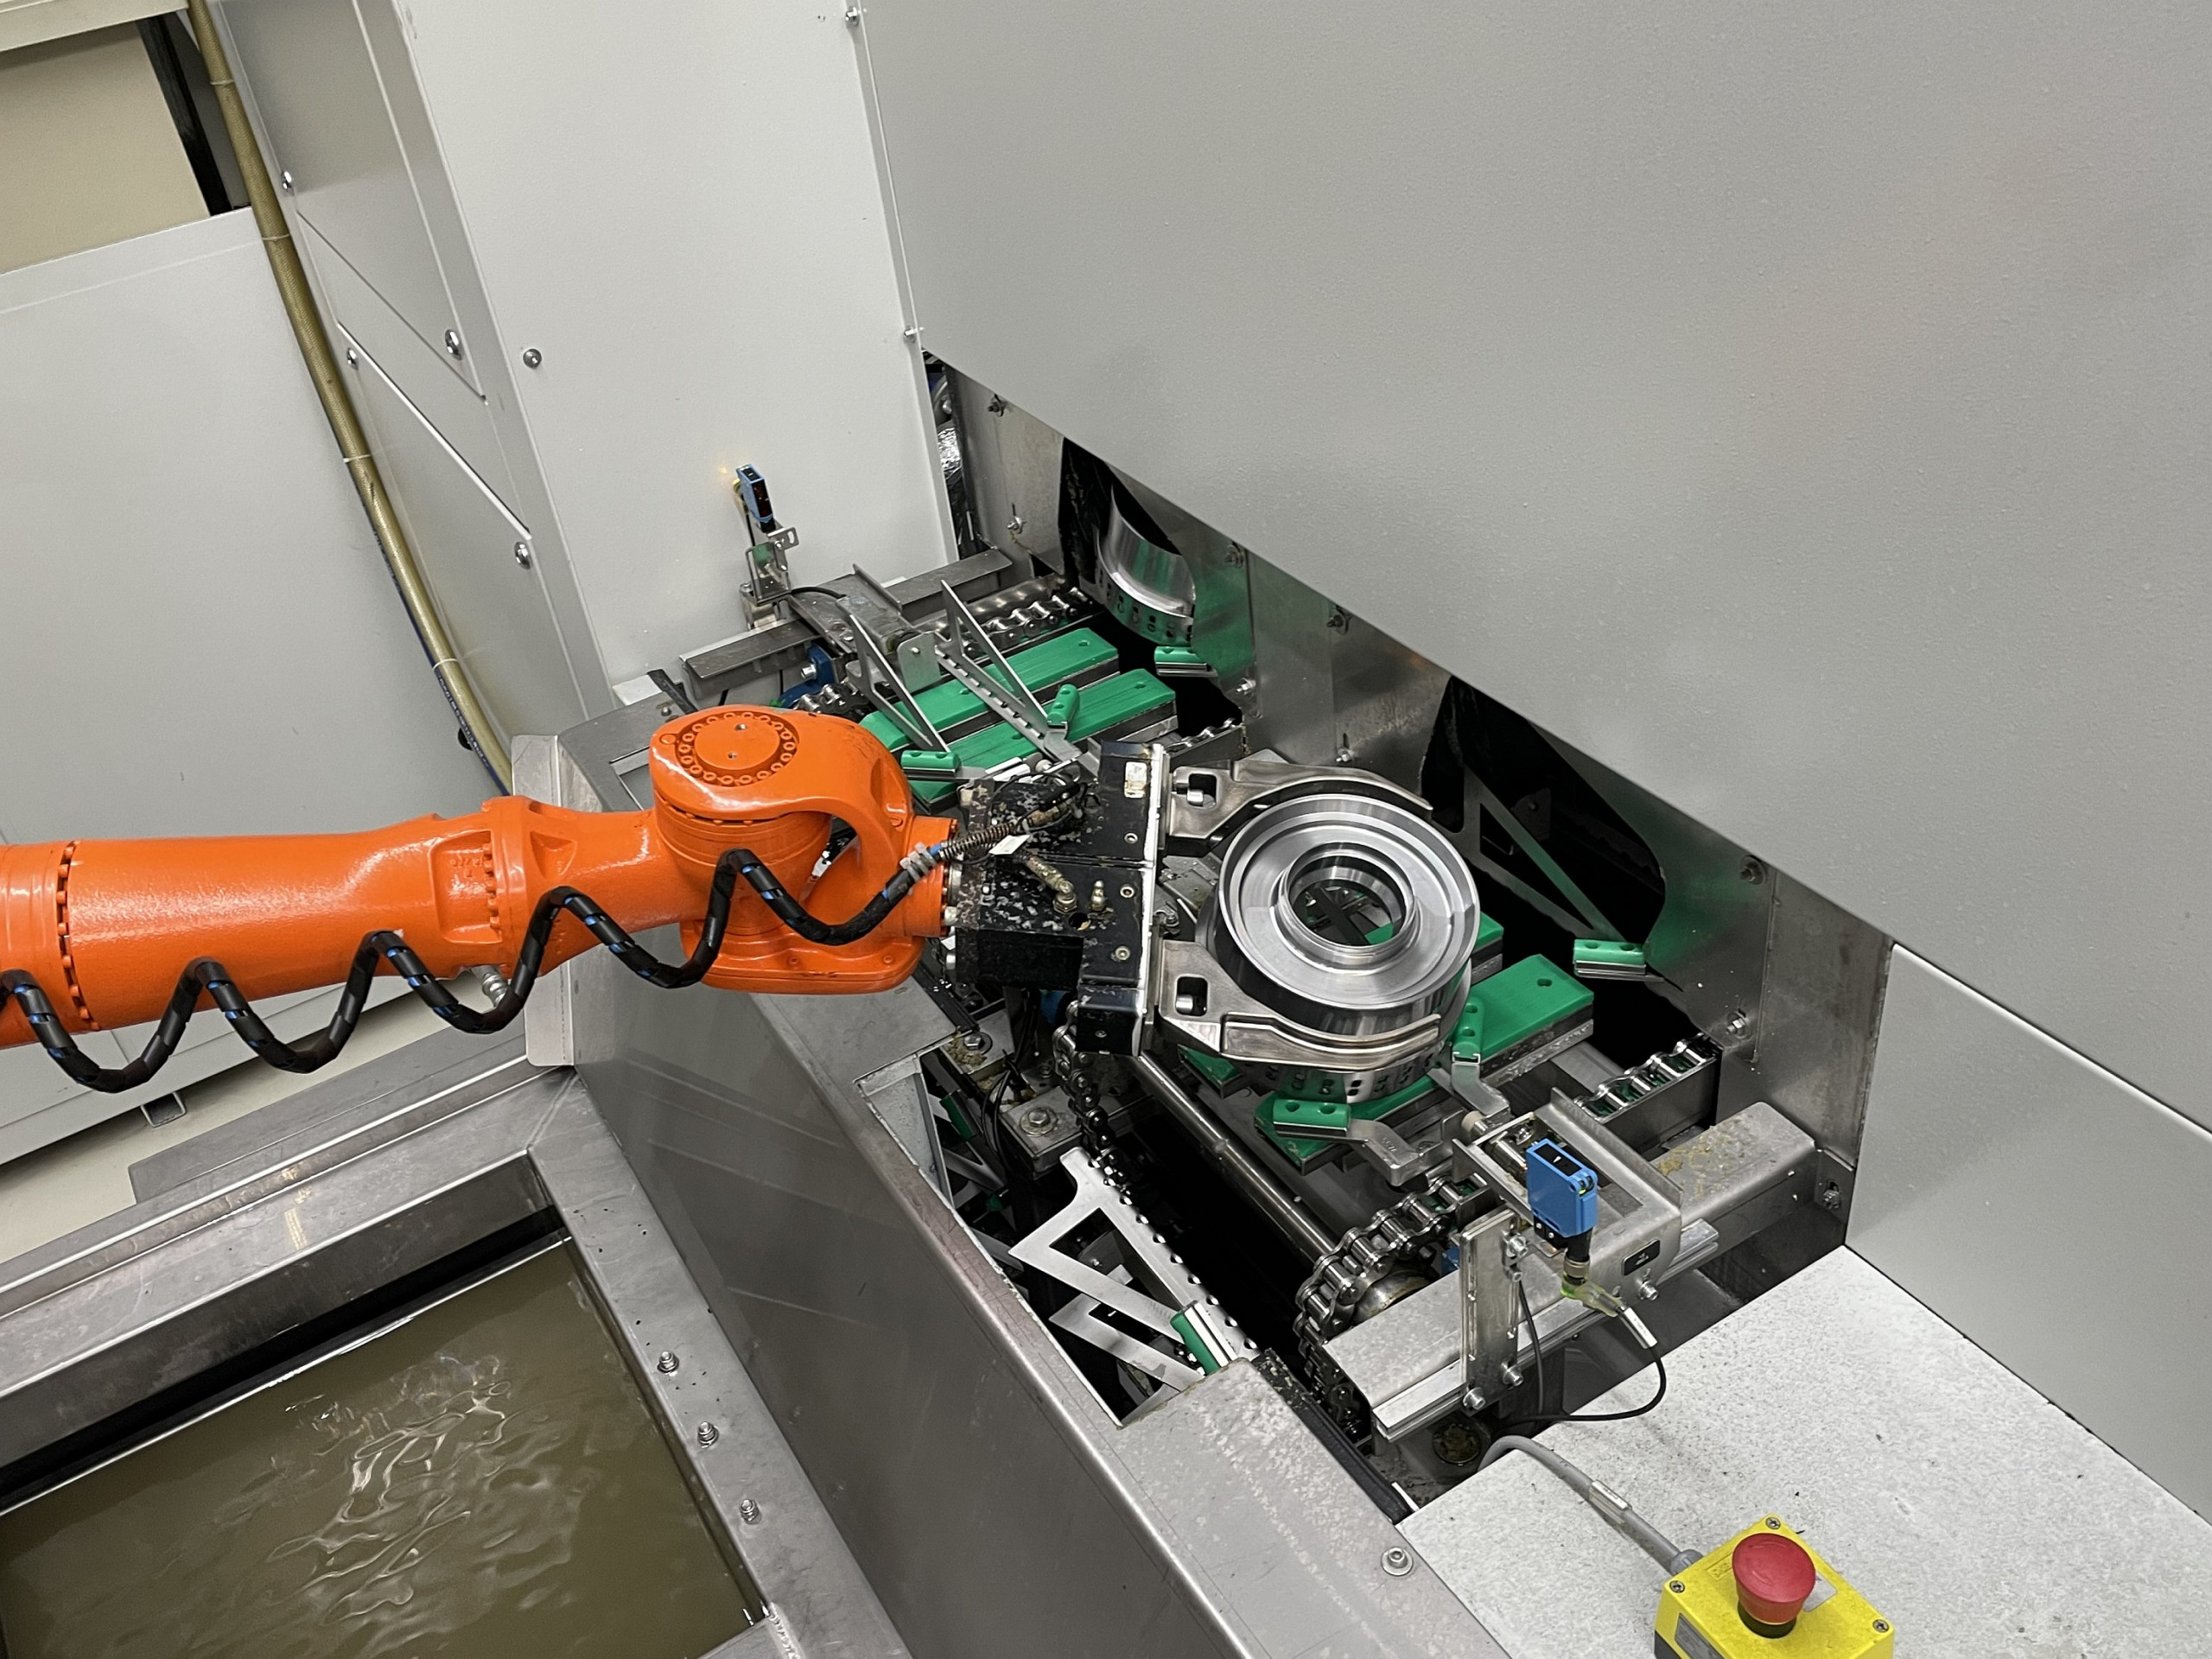 Before placing the lamellae carriers on the workpiece holders designed for cleaning, coarse impurities and the electrolyte from the deburring process are reduced by immersion in an ultrasonic bath. © Fischer & Kaufmann